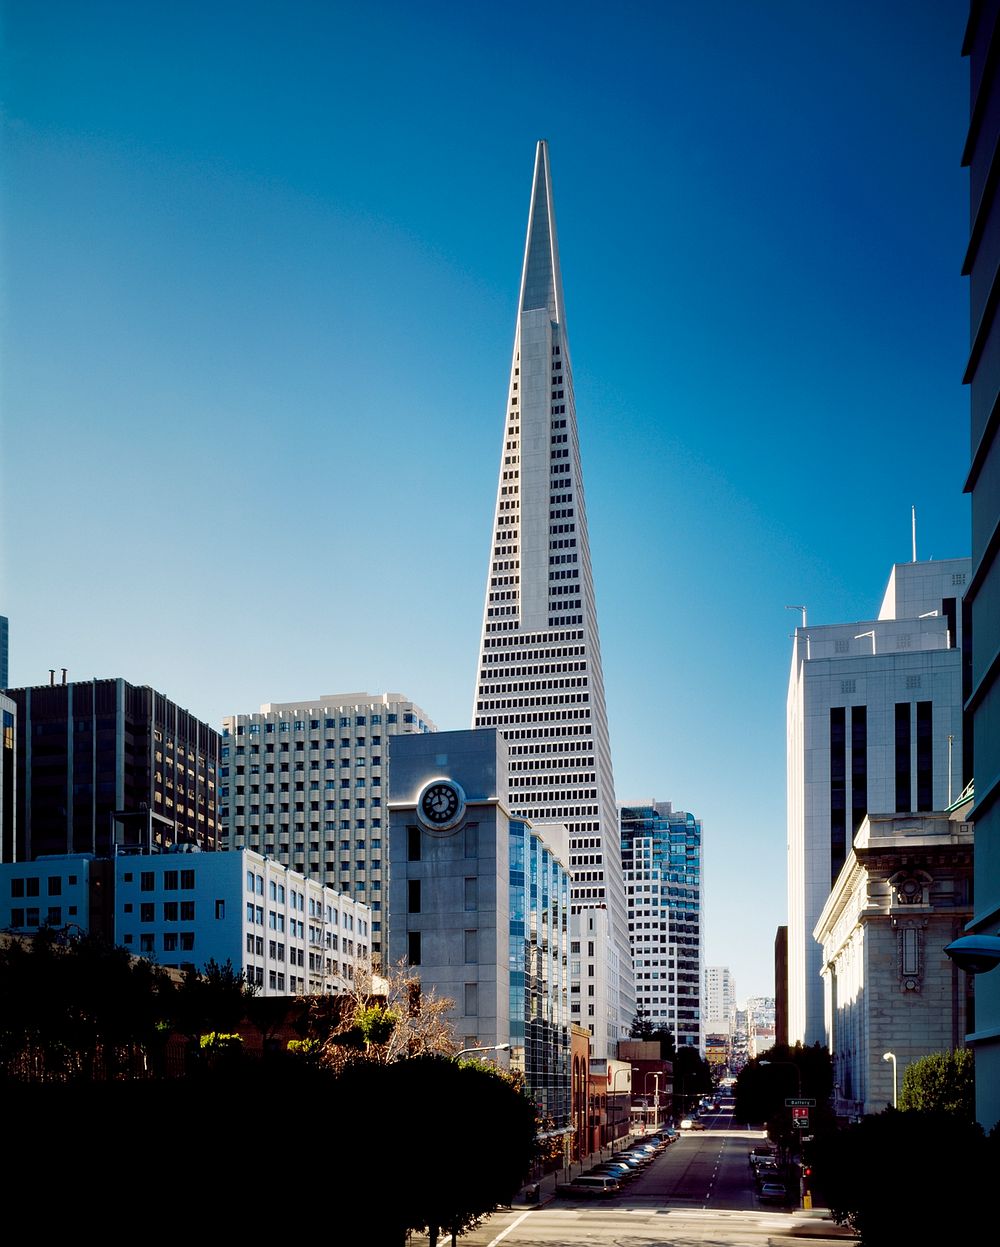 The Transamerica Pyramid in San Francisco. Original image from Carol M. Highsmith&rsquo;s America, Library of Congress…